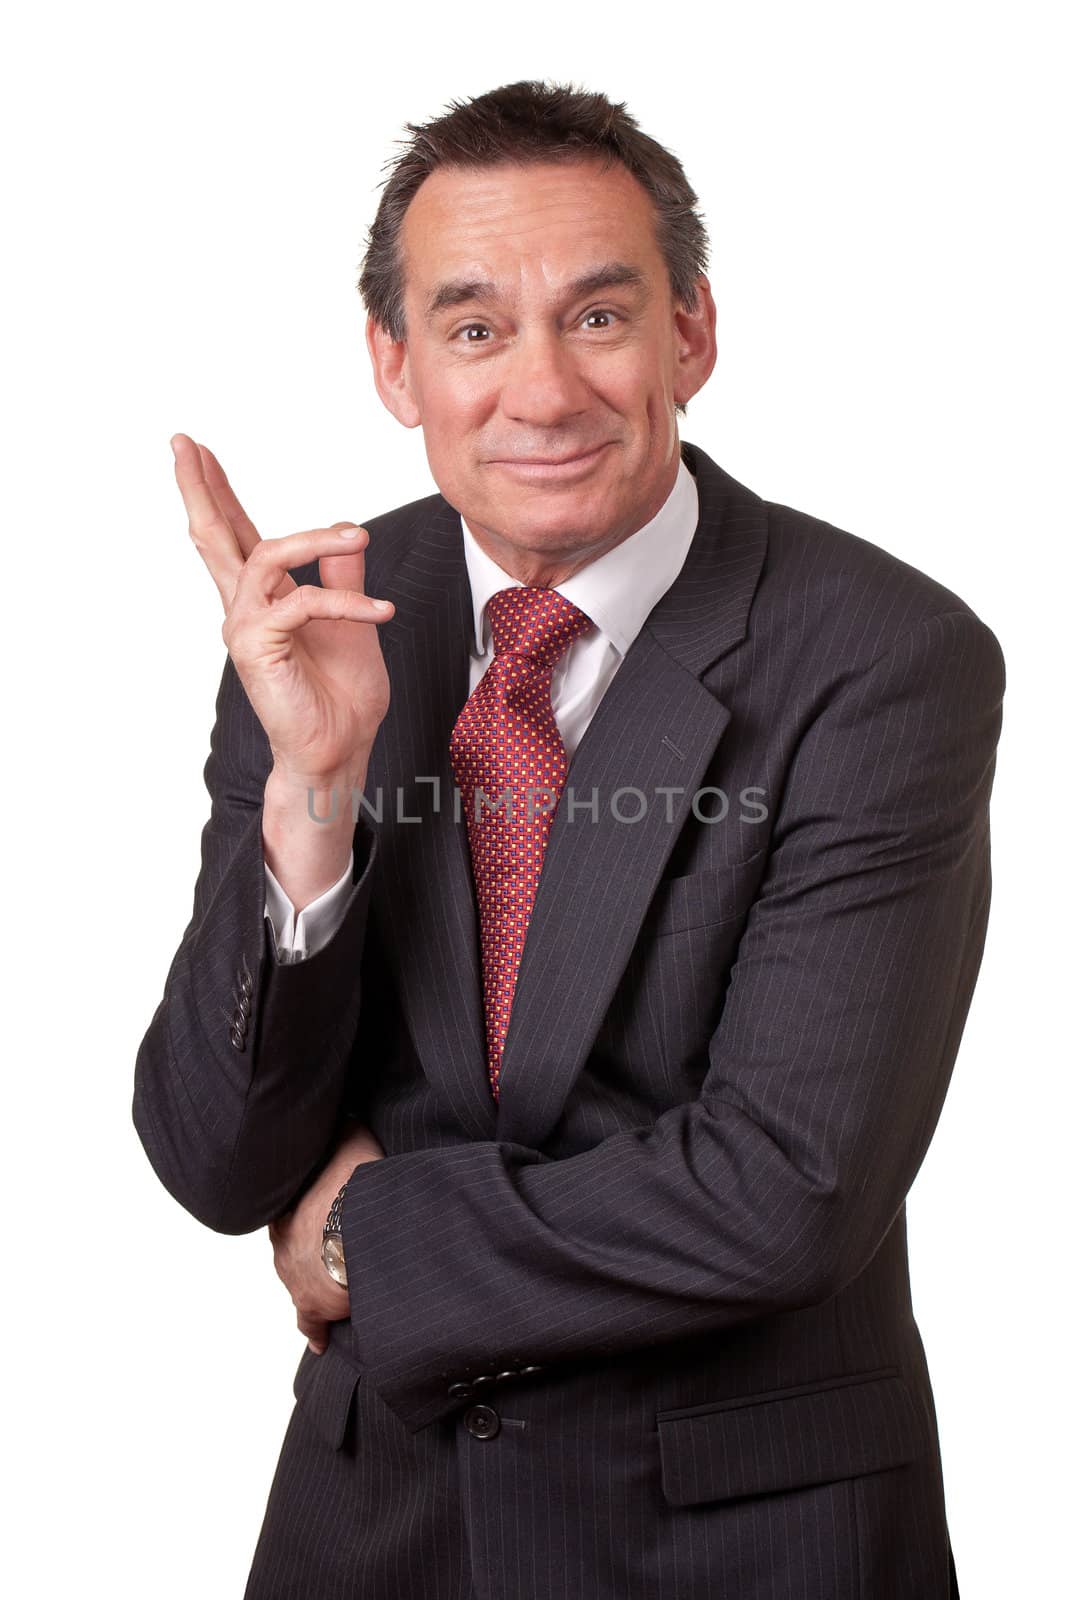 Attractive Grinning Middle Age Business Man in Suit about to Laugh Isolated